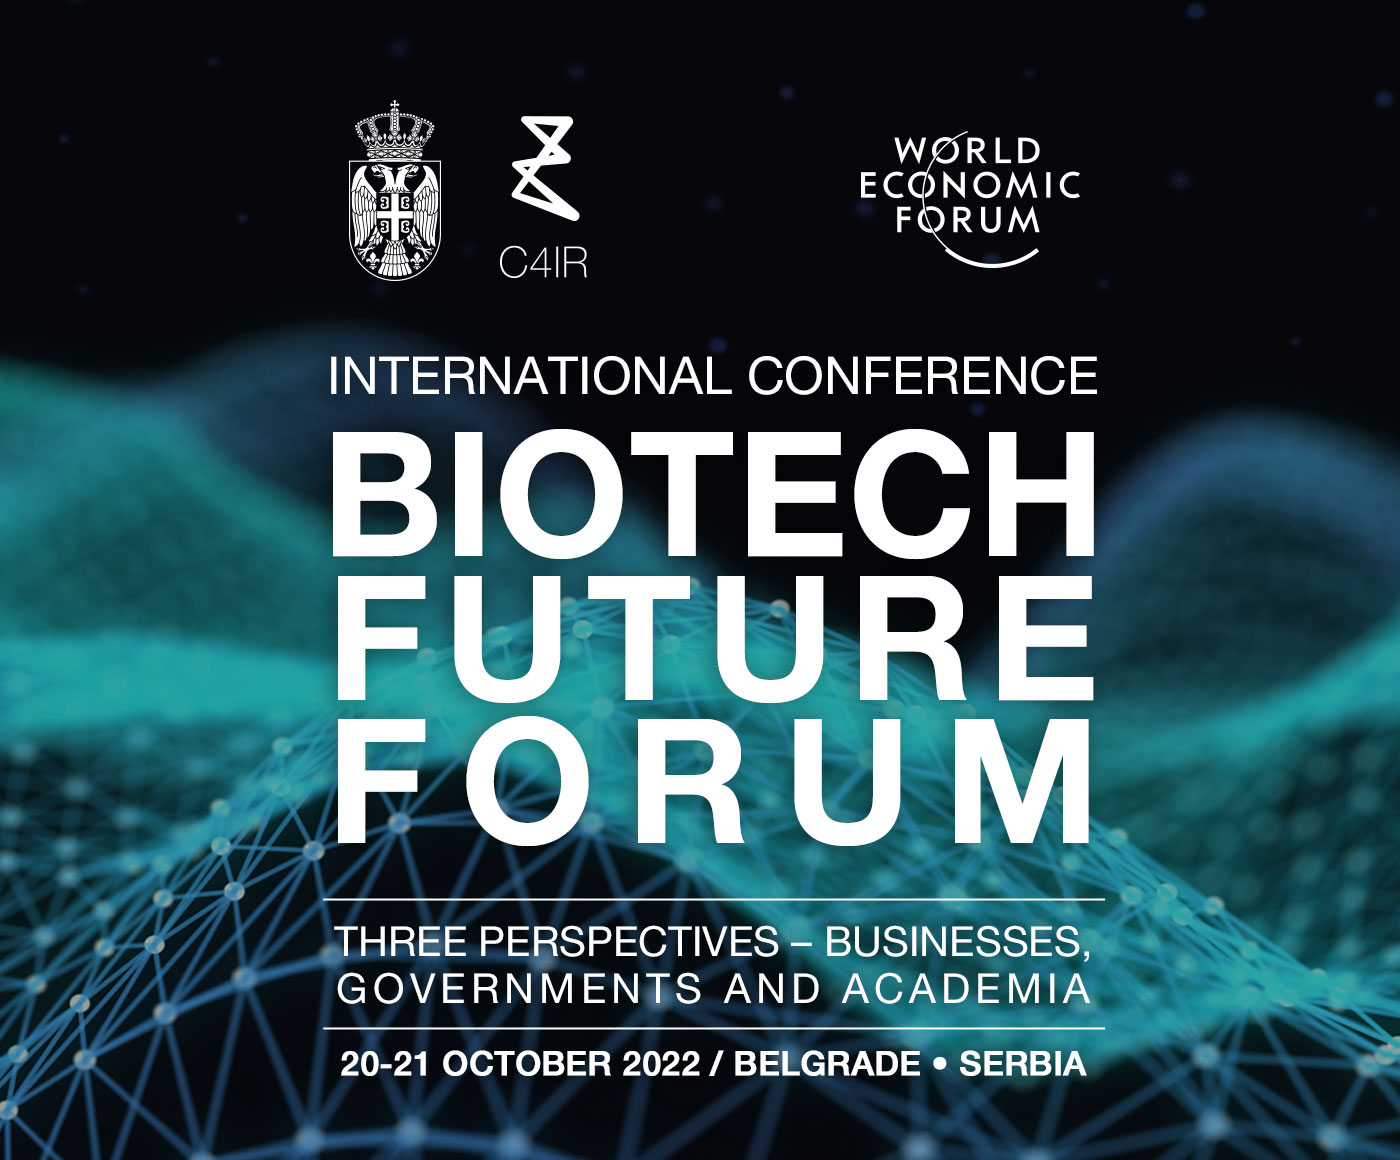 Biotech Future Forum 2022: The First International Conference On Biotechnology In Serbia